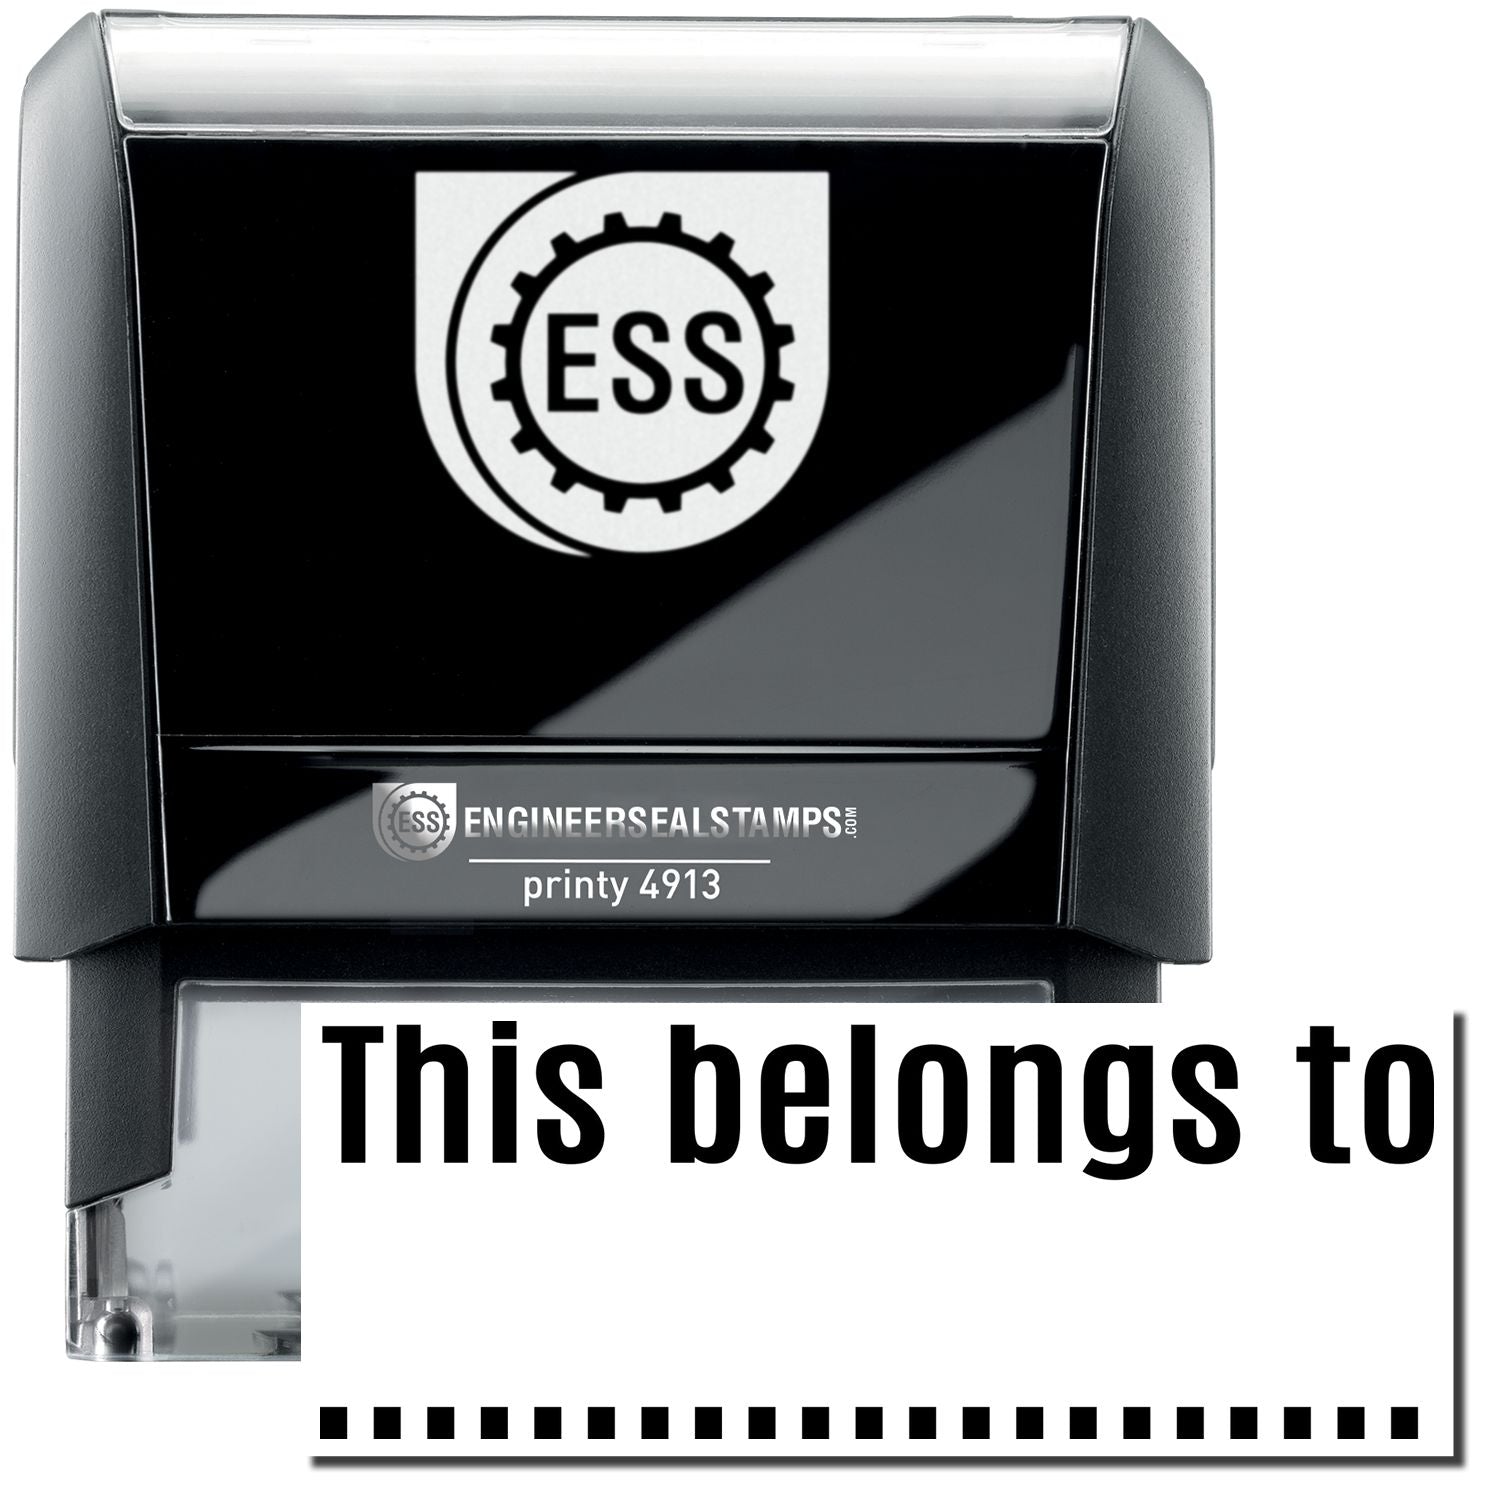 A self-inking stamp with a stamped image showing how the text "This belongs to" in a large font with a dotted line under the text is displayed after stamping.